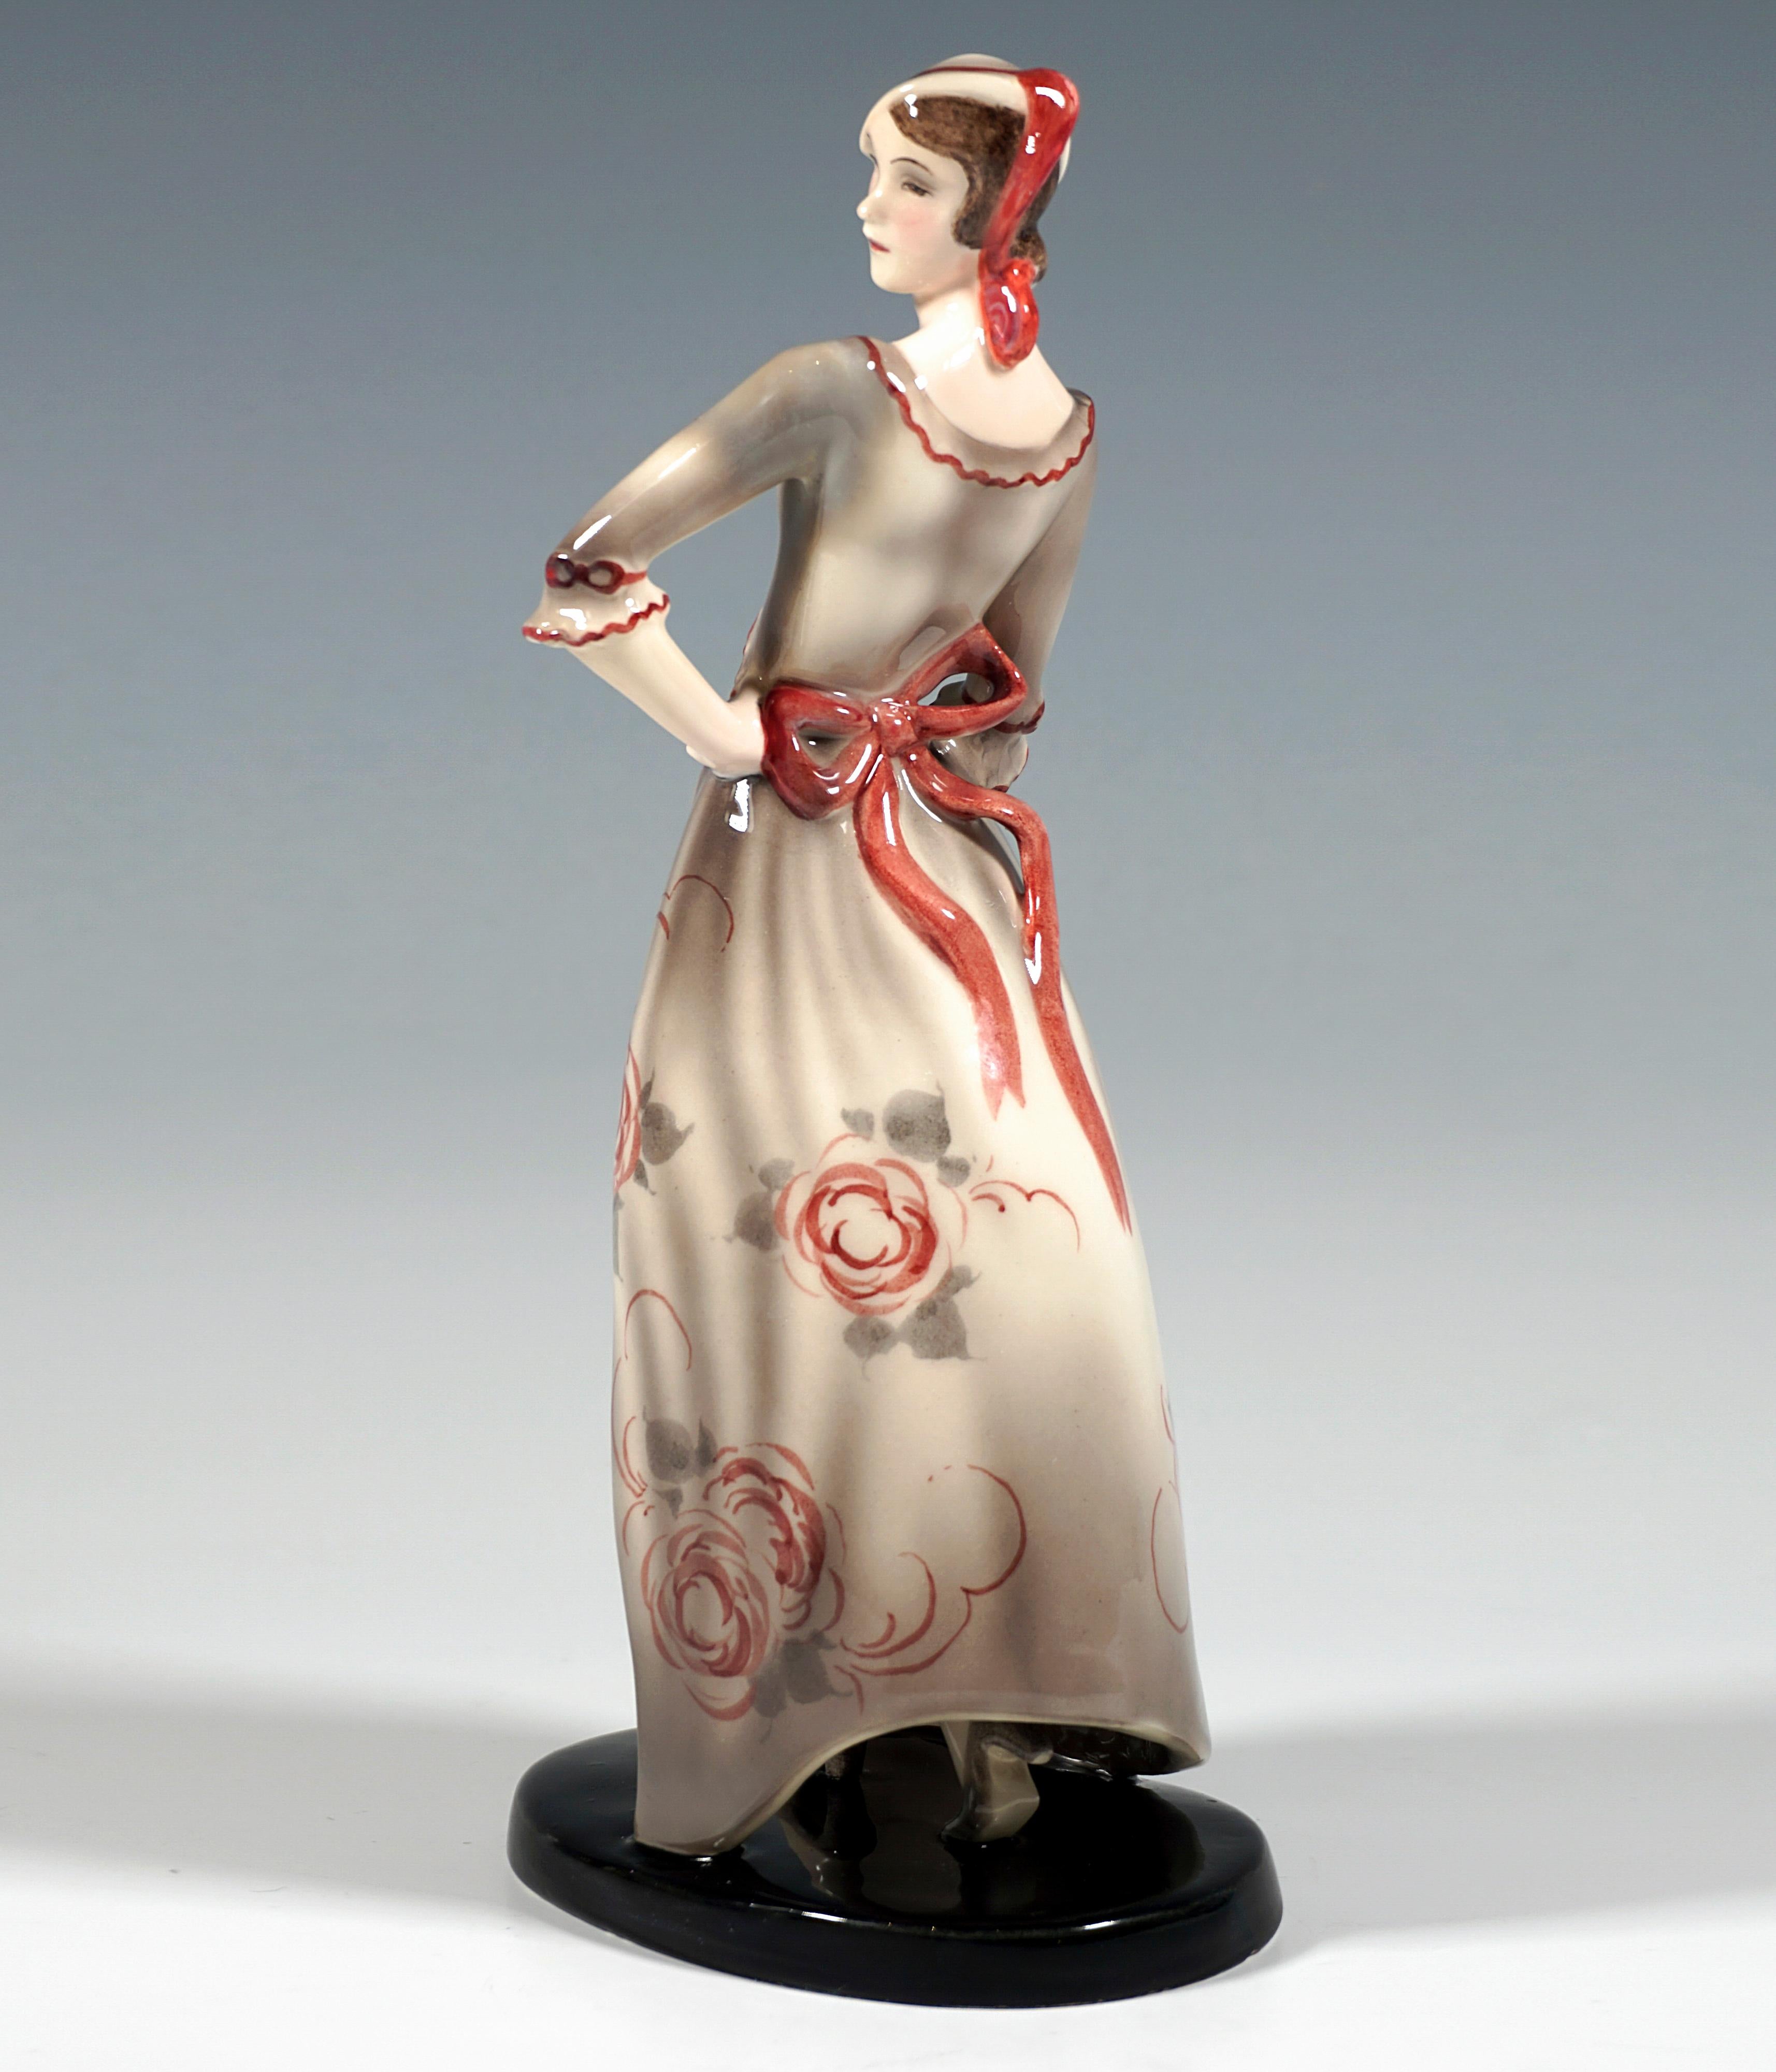 Depiction of an elegant young lady posing in a long, low-cut light gray wrap dress decorated with red flowers, a large red bow tied at the back, three-quarter sleeves with ruffles, the skirt part puffed out by the wind so that the long slender legs